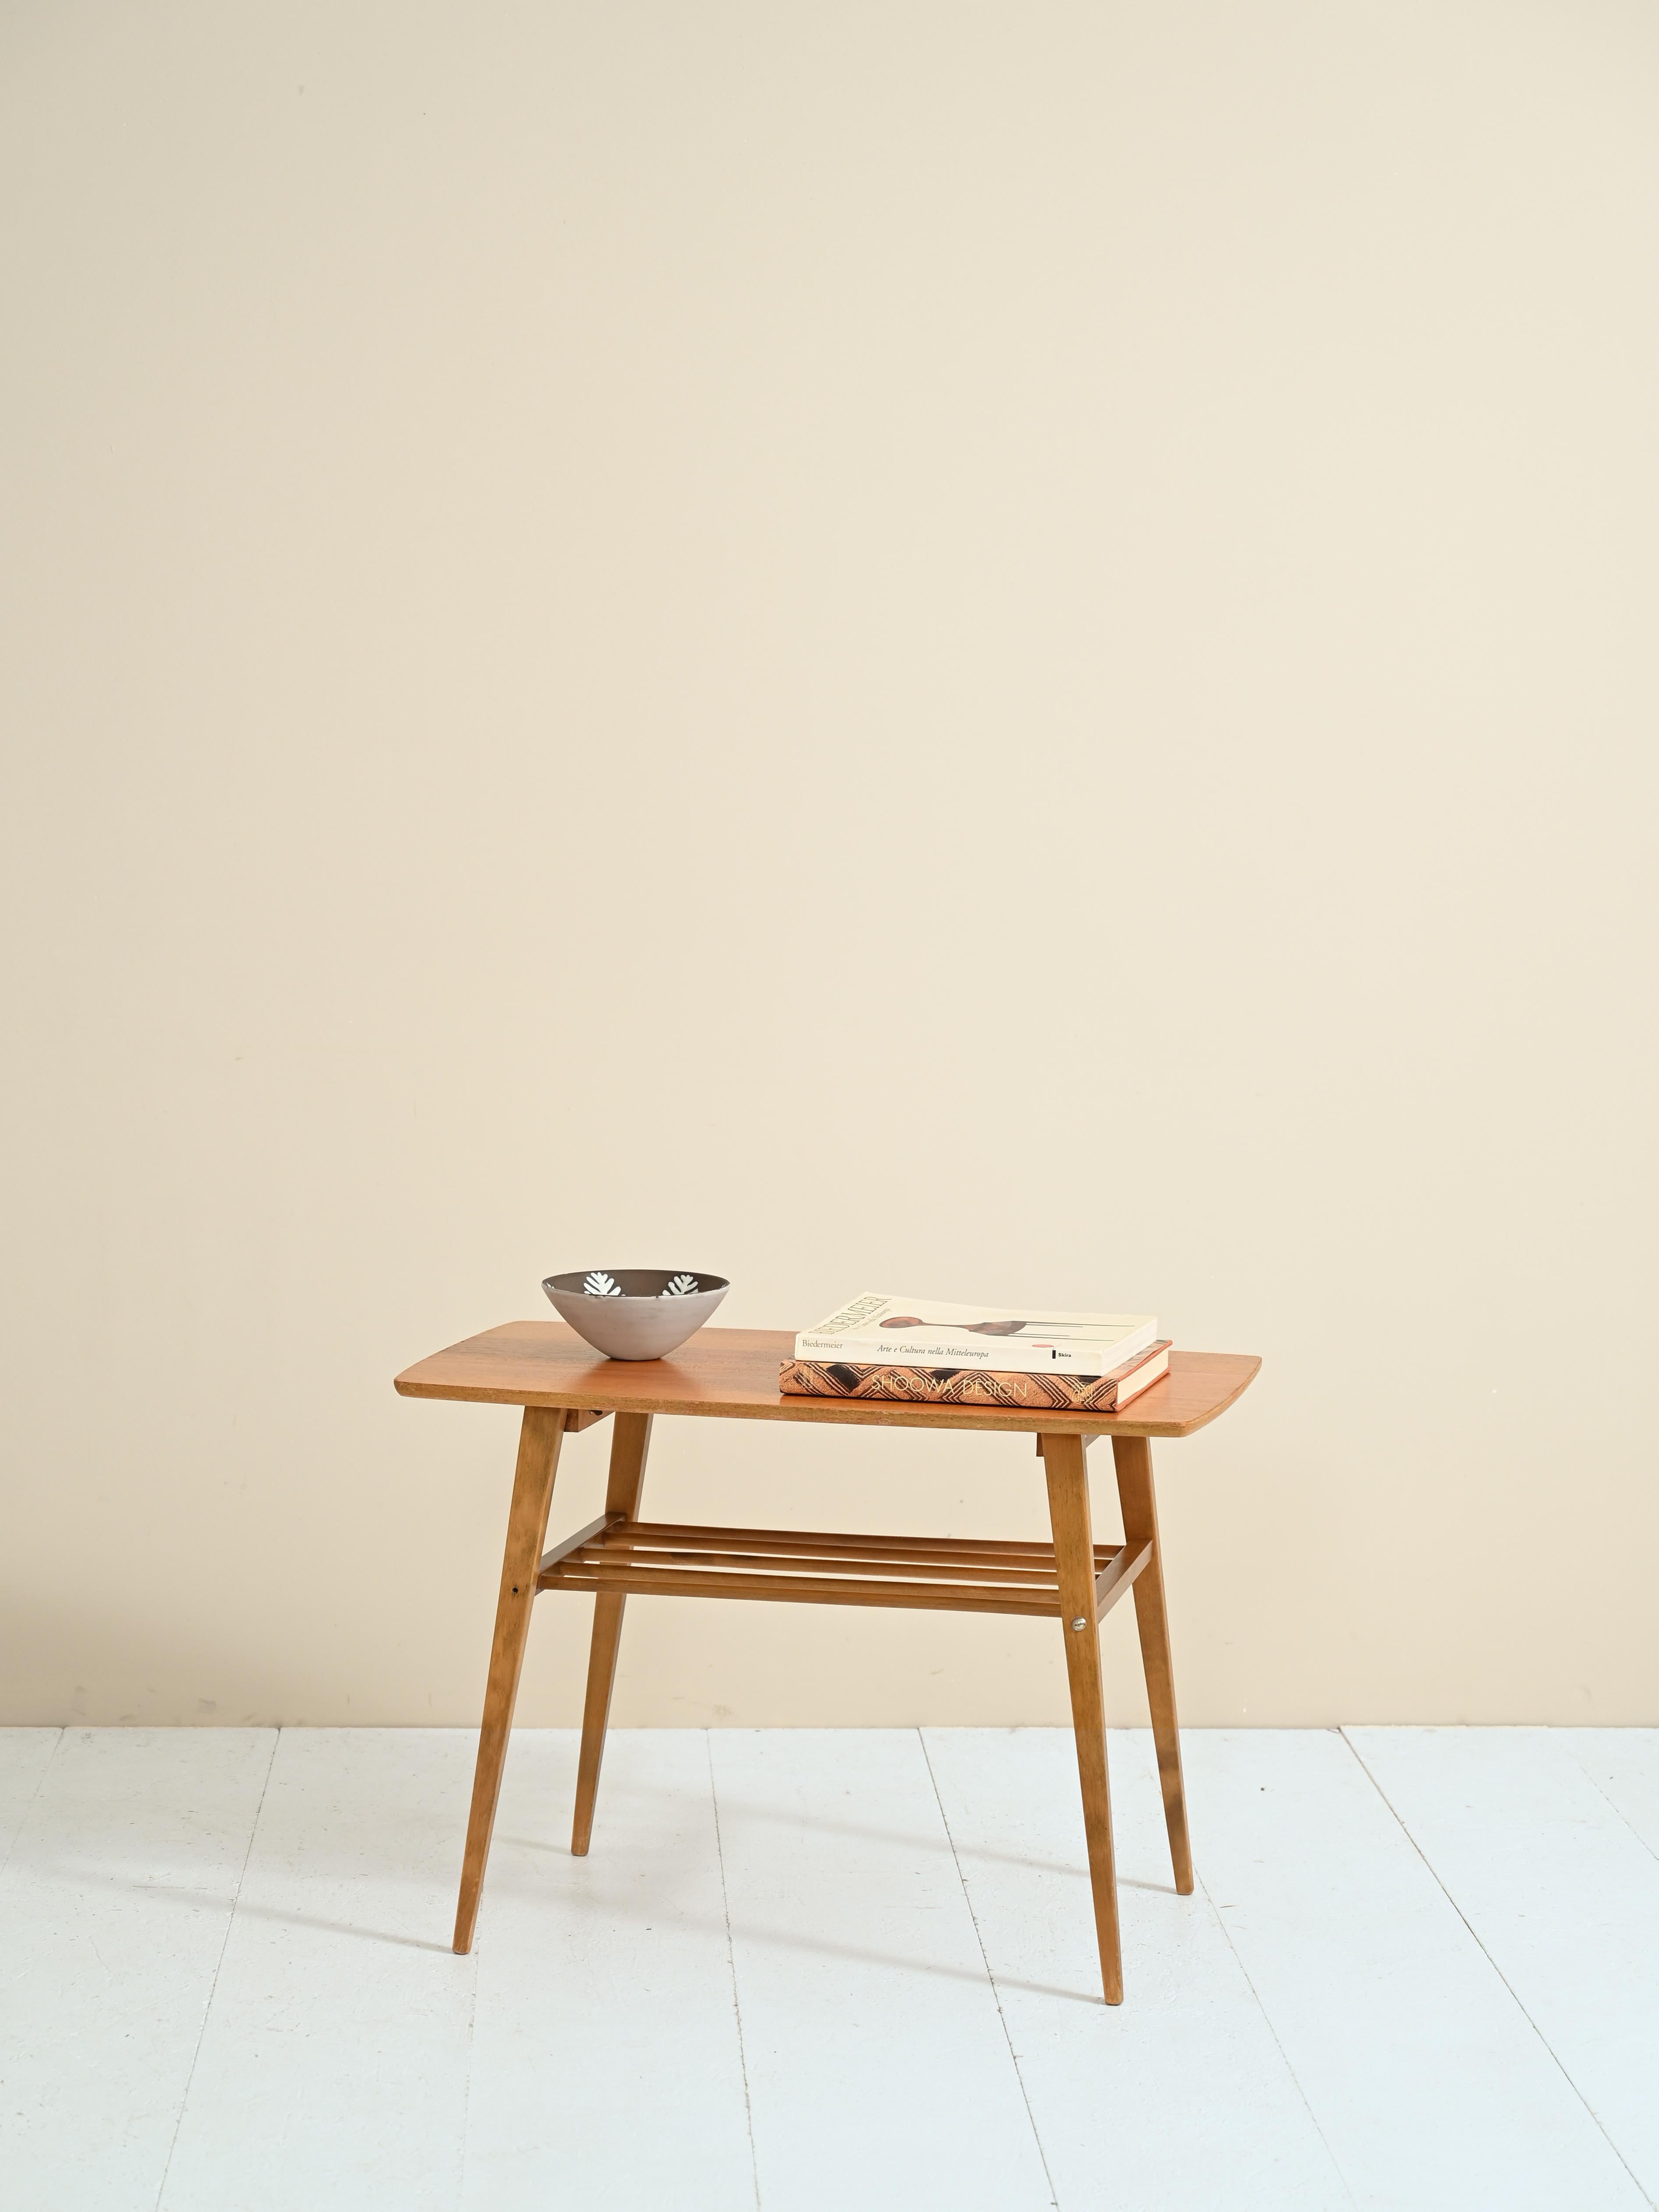 Vintage coffee table with magazine shelf.
The clean, minimal lines trace the Nordic tradition of combining aesthetics and functionality.
This small-sized coffee table can be used as a bedside table and thanks to the
presence of a second shelf, it is